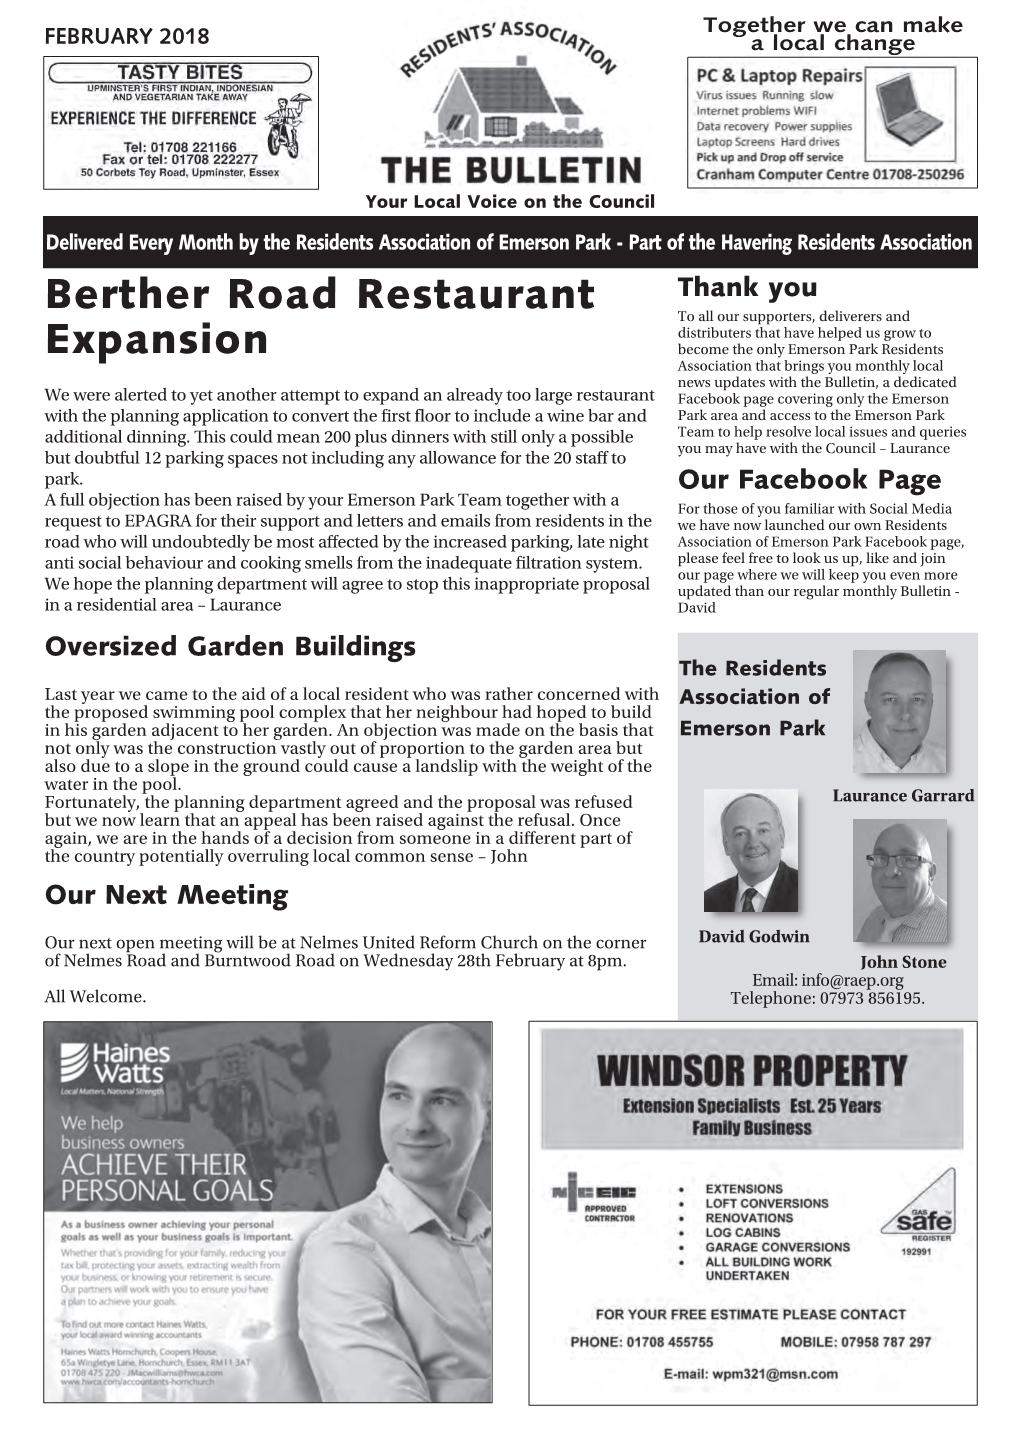 Berther Road Restaurant Expansion